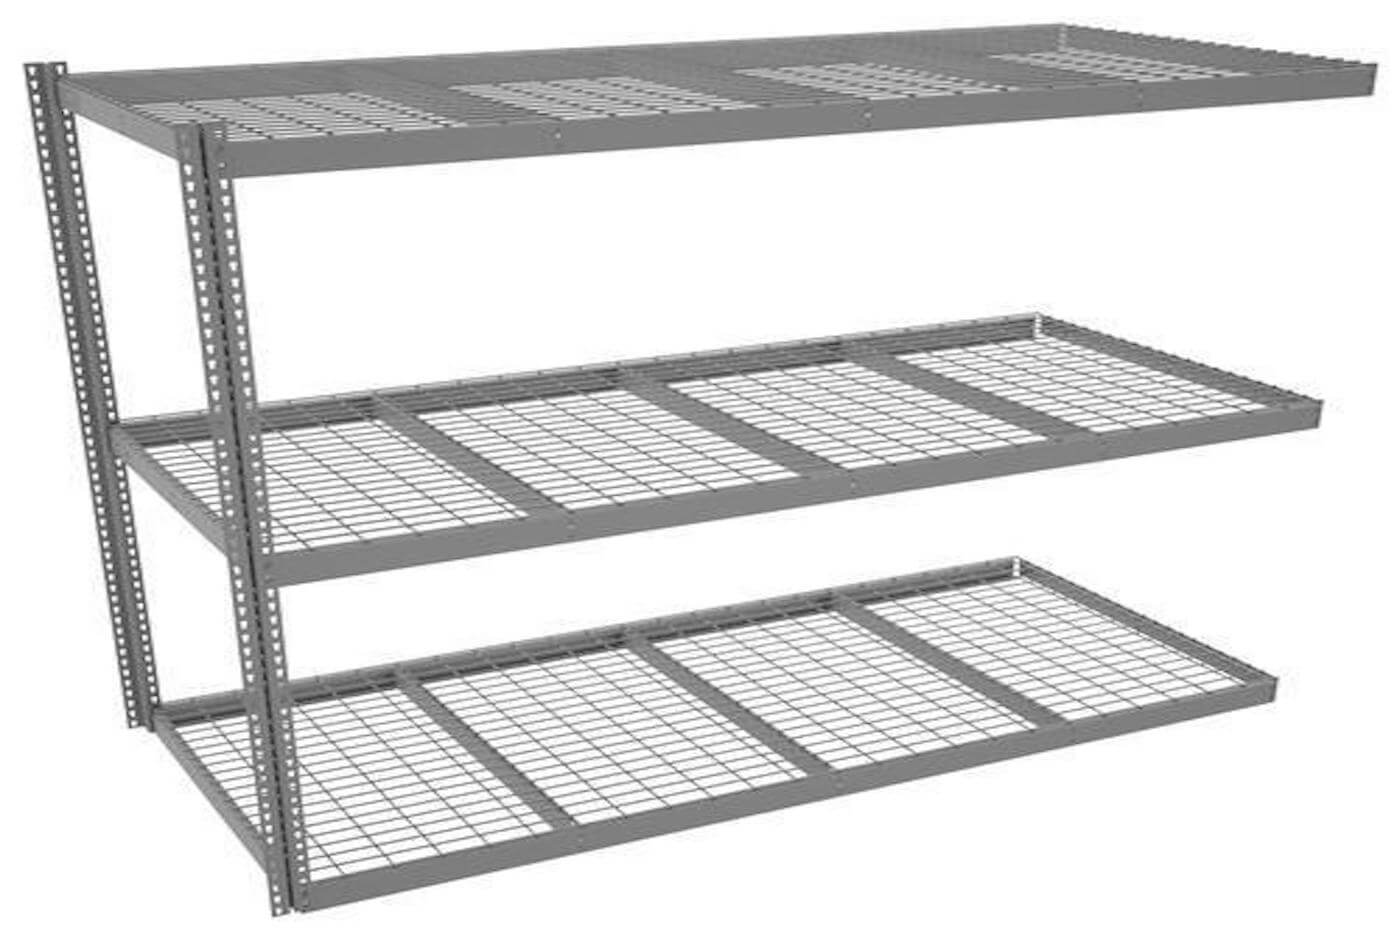 3 Things to Consider When Purchasing Pallet Rack Wire Decking